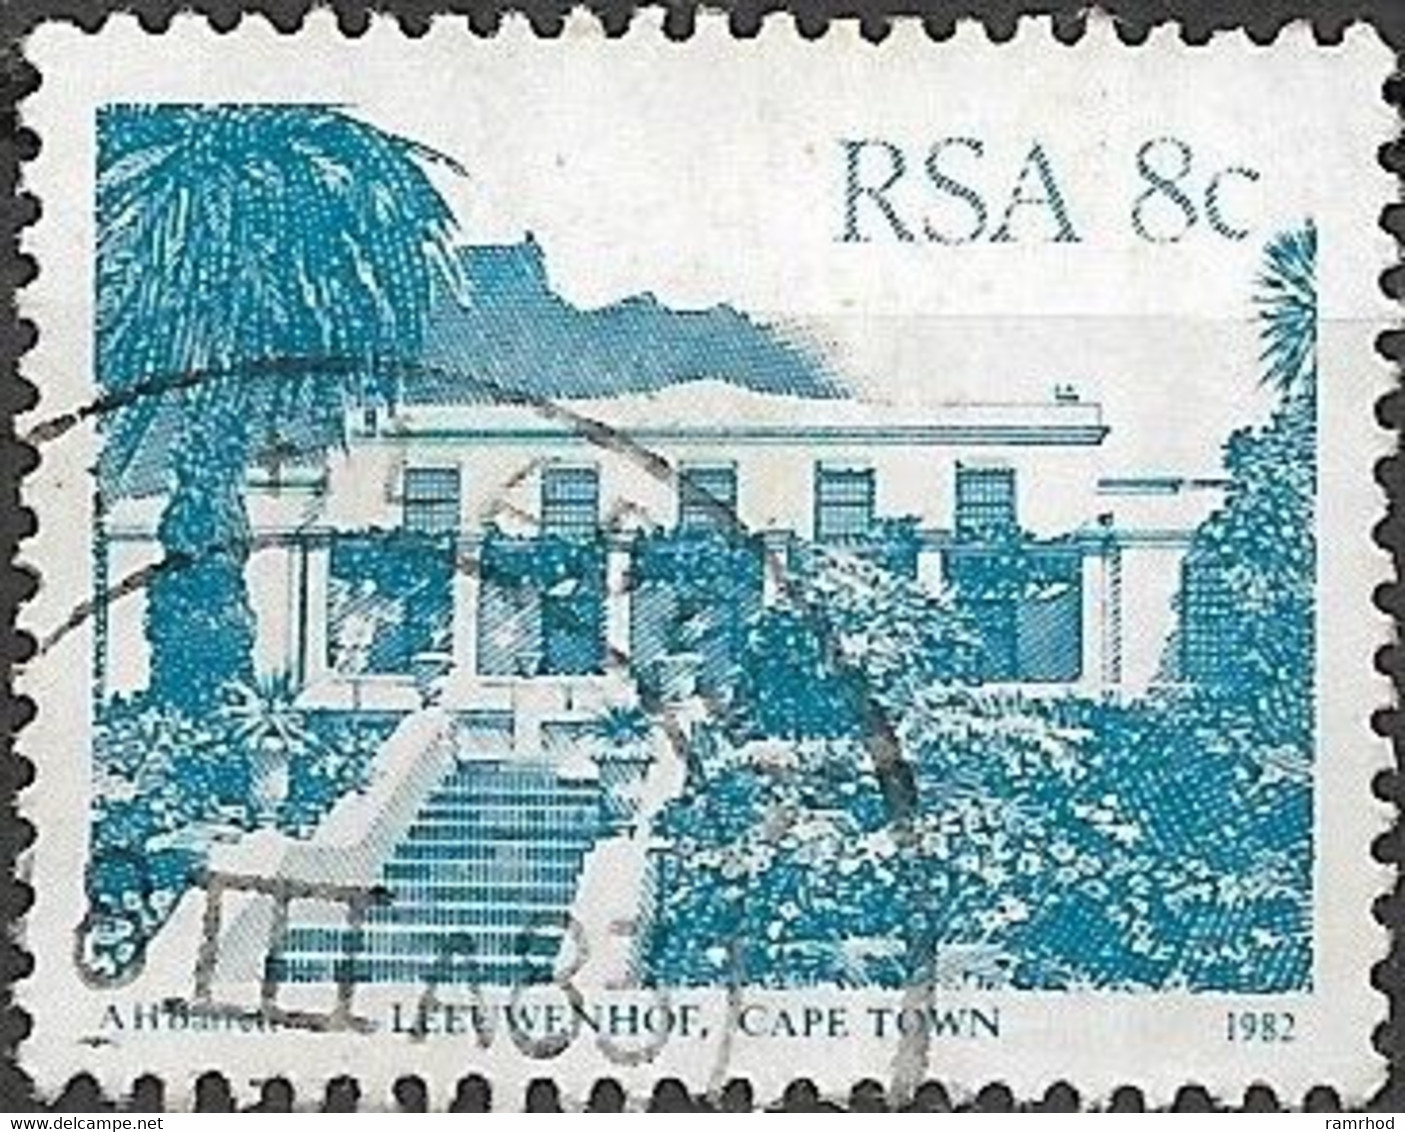 SOUTH AFRICA 1982 Architecture. - 8c Leeuwenhof, Cape Town FU - Used Stamps